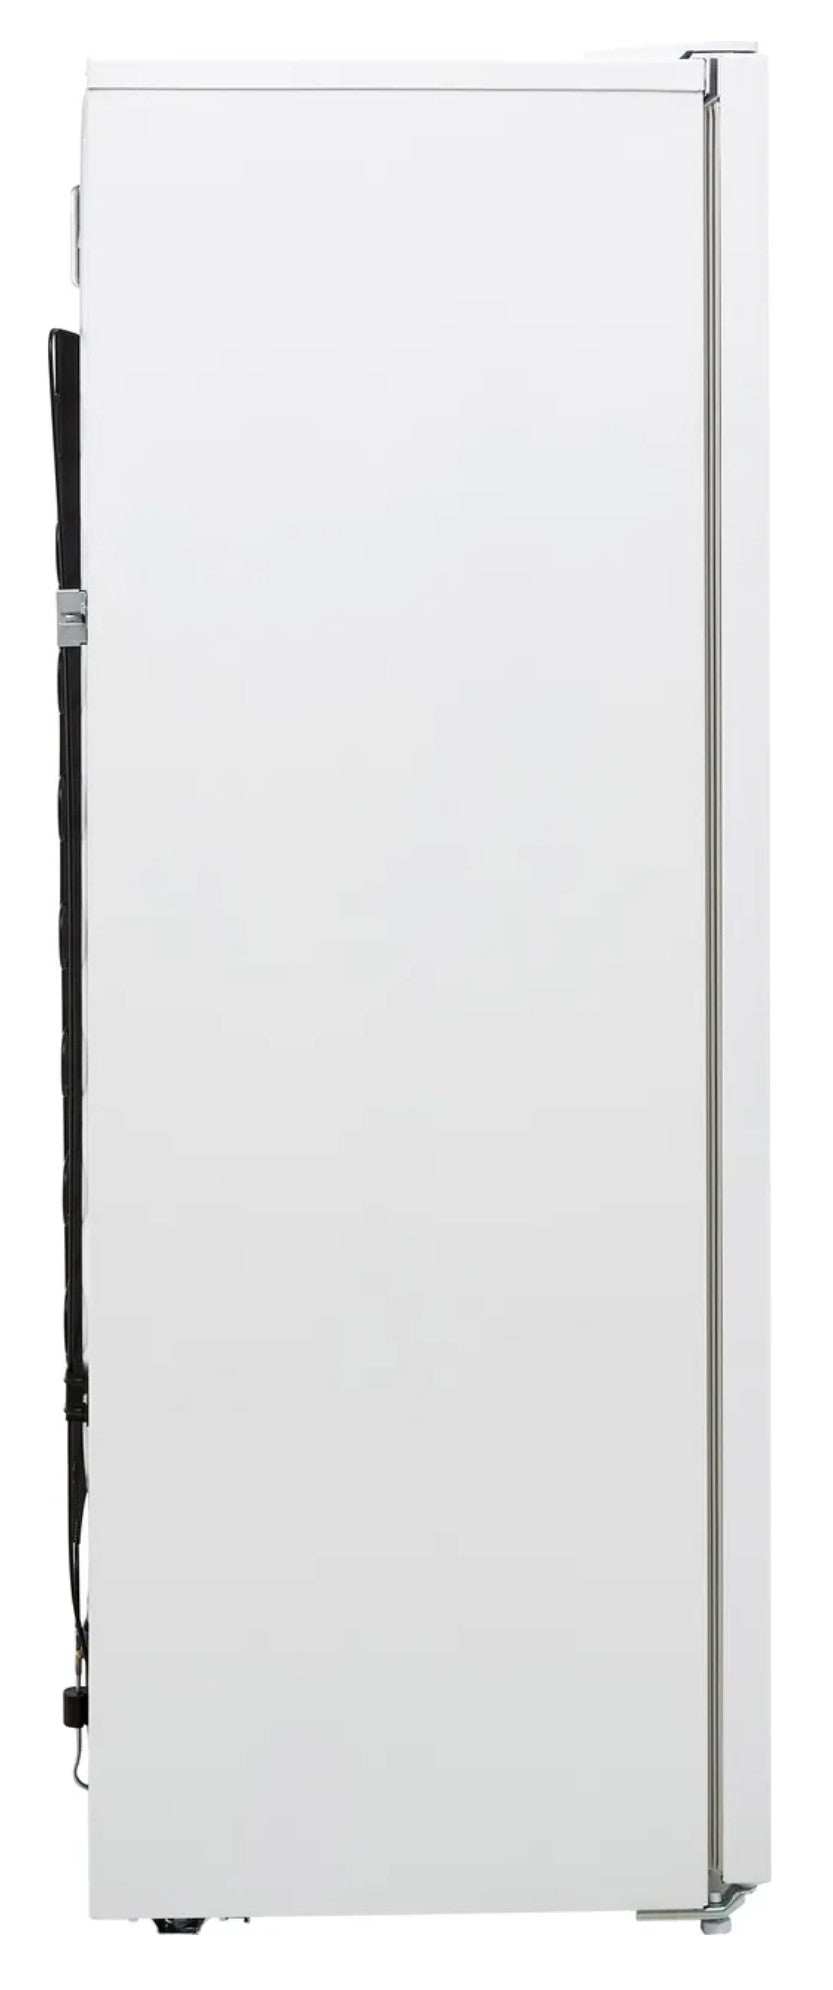 Beko FFG3545W Frost Free Upright Freezer (Graded) - White - F Rated